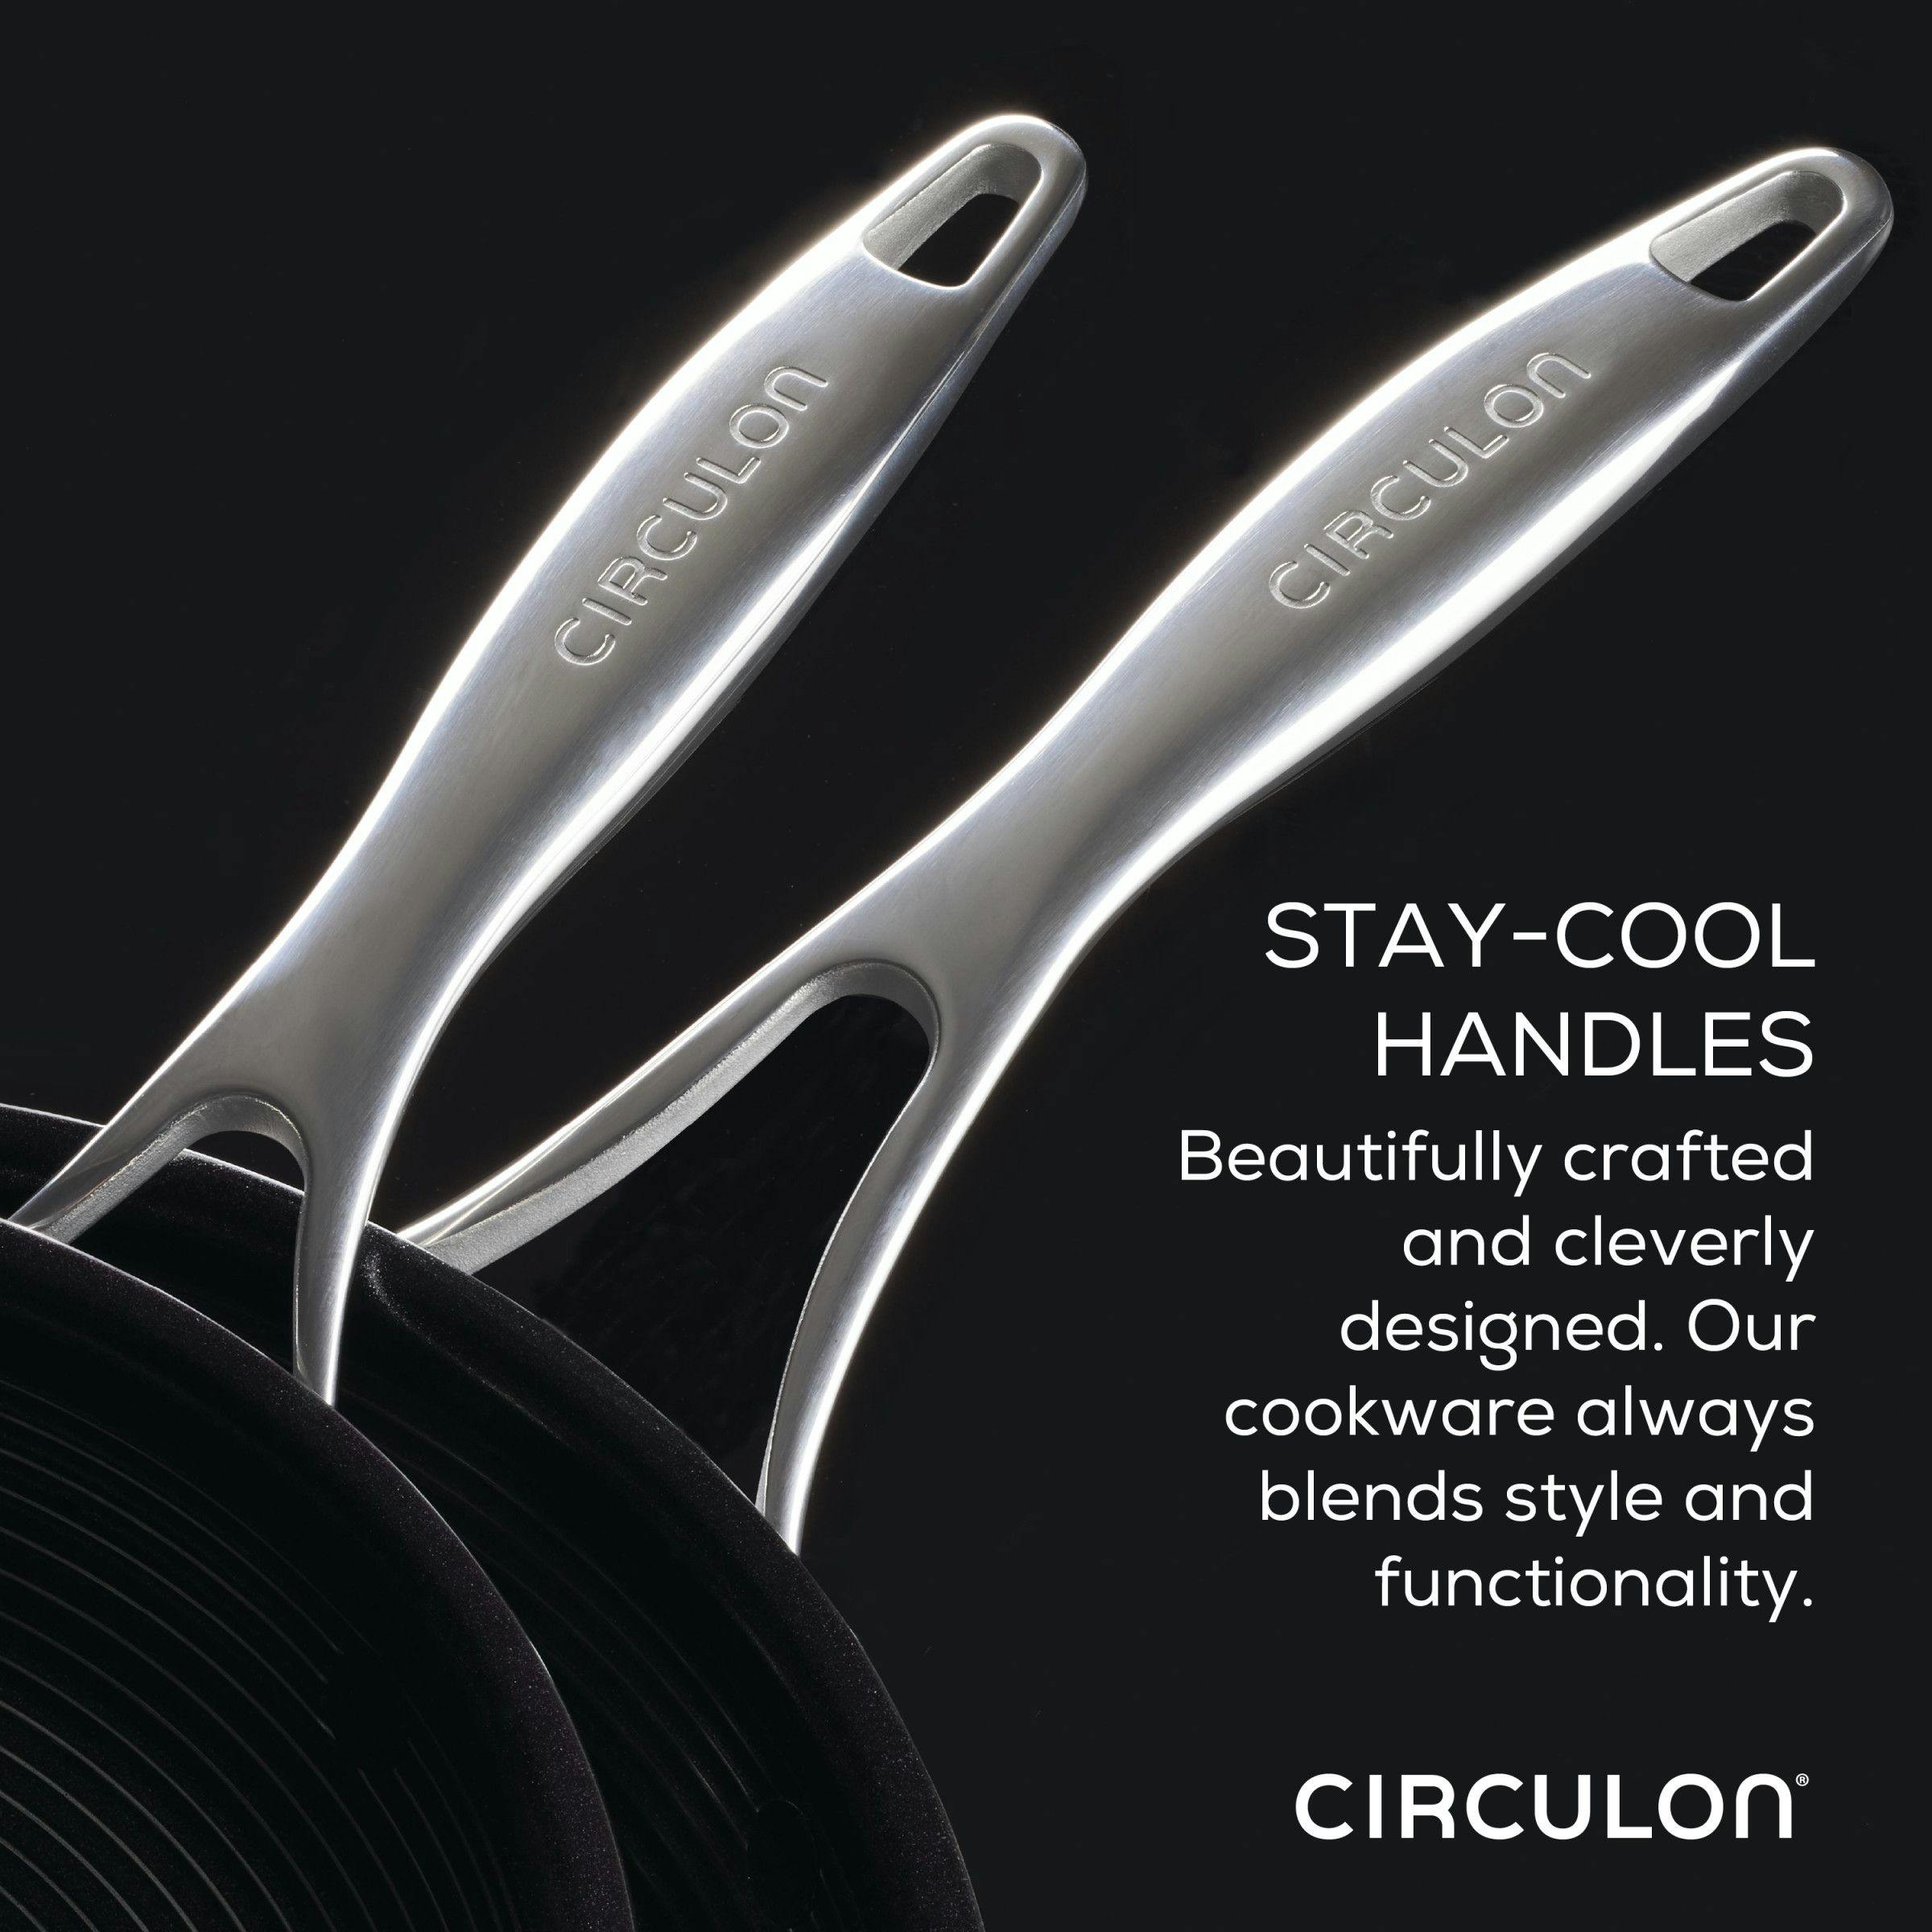 Circulon Clad Stainless Steel Frying Pan Set with Hybrid SteelShield and Nonstick Technology, 2-Piece, Silver